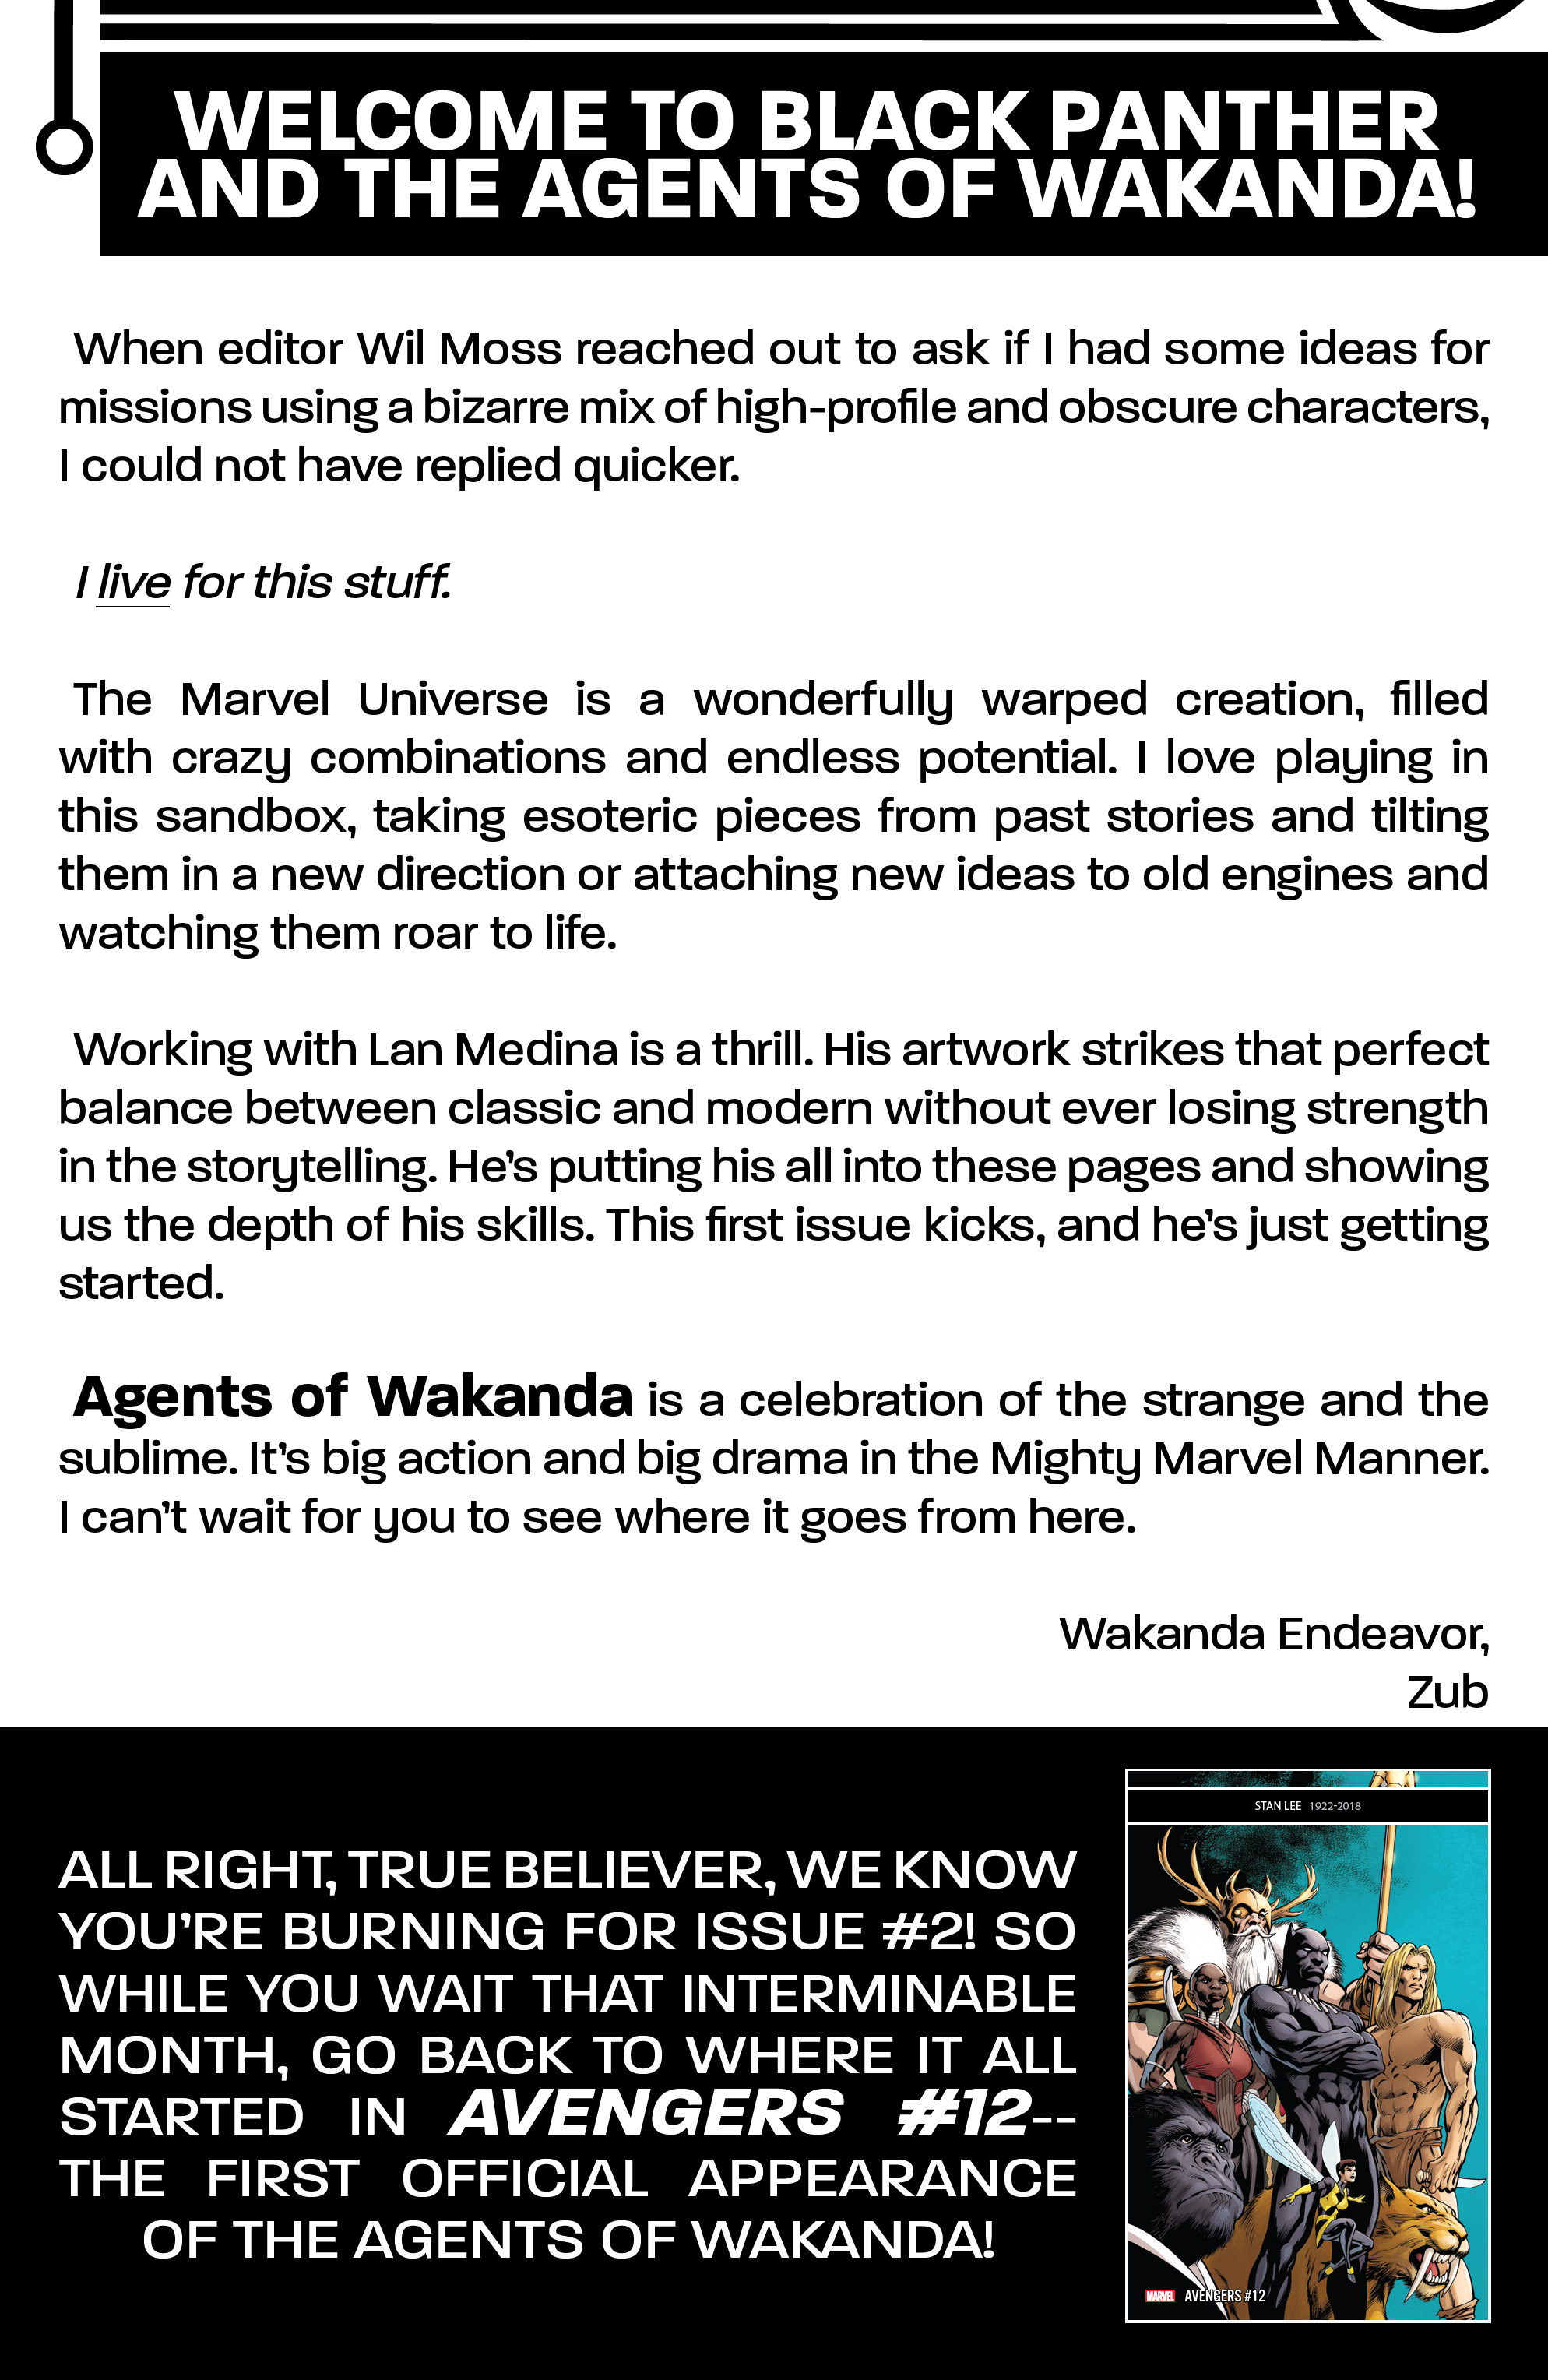 Read online Black Panther and the Agents of Wakanda comic -  Issue #1 - 23